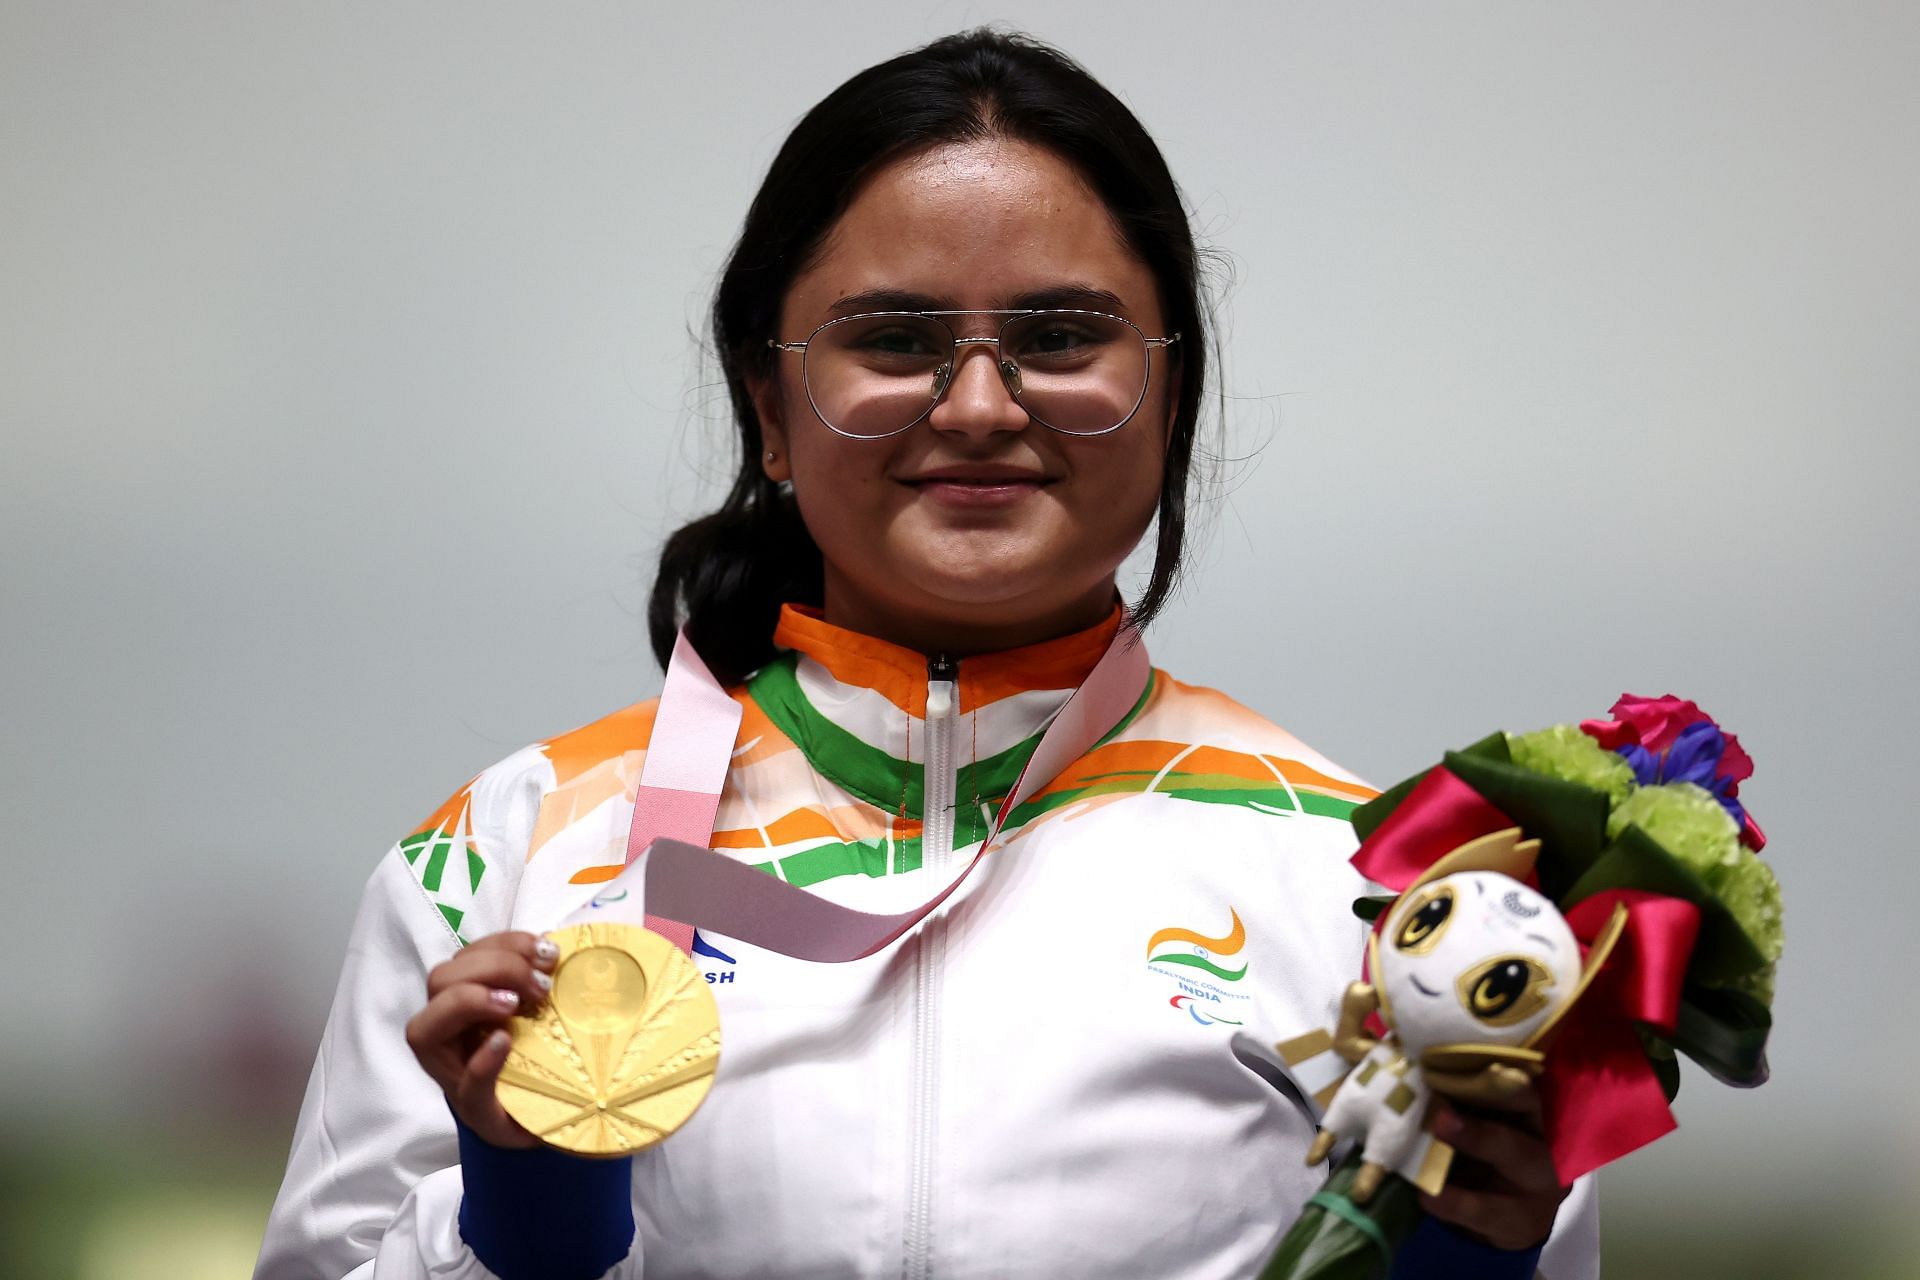 Avani poses with her Paralympic gold medal. (PC: Getty Images)